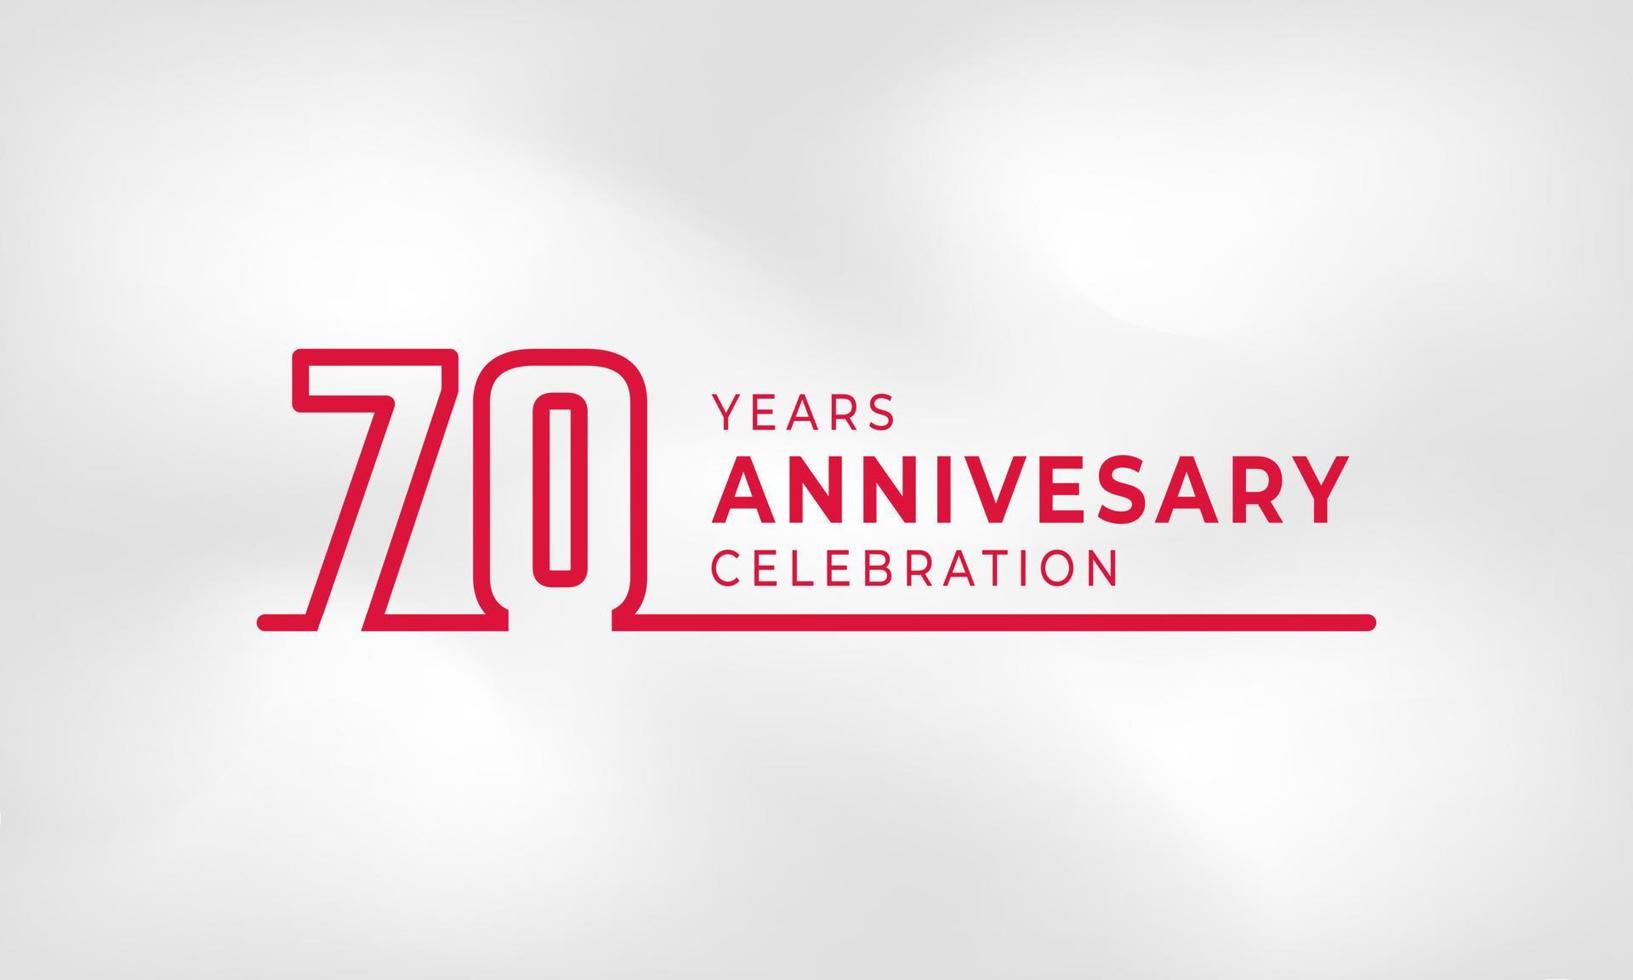 70 Year Anniversary Celebration Linked Logotype Outline Number Red Color for Celebration Event, Wedding, Greeting card, and Invitation Isolated on White Texture Background vector